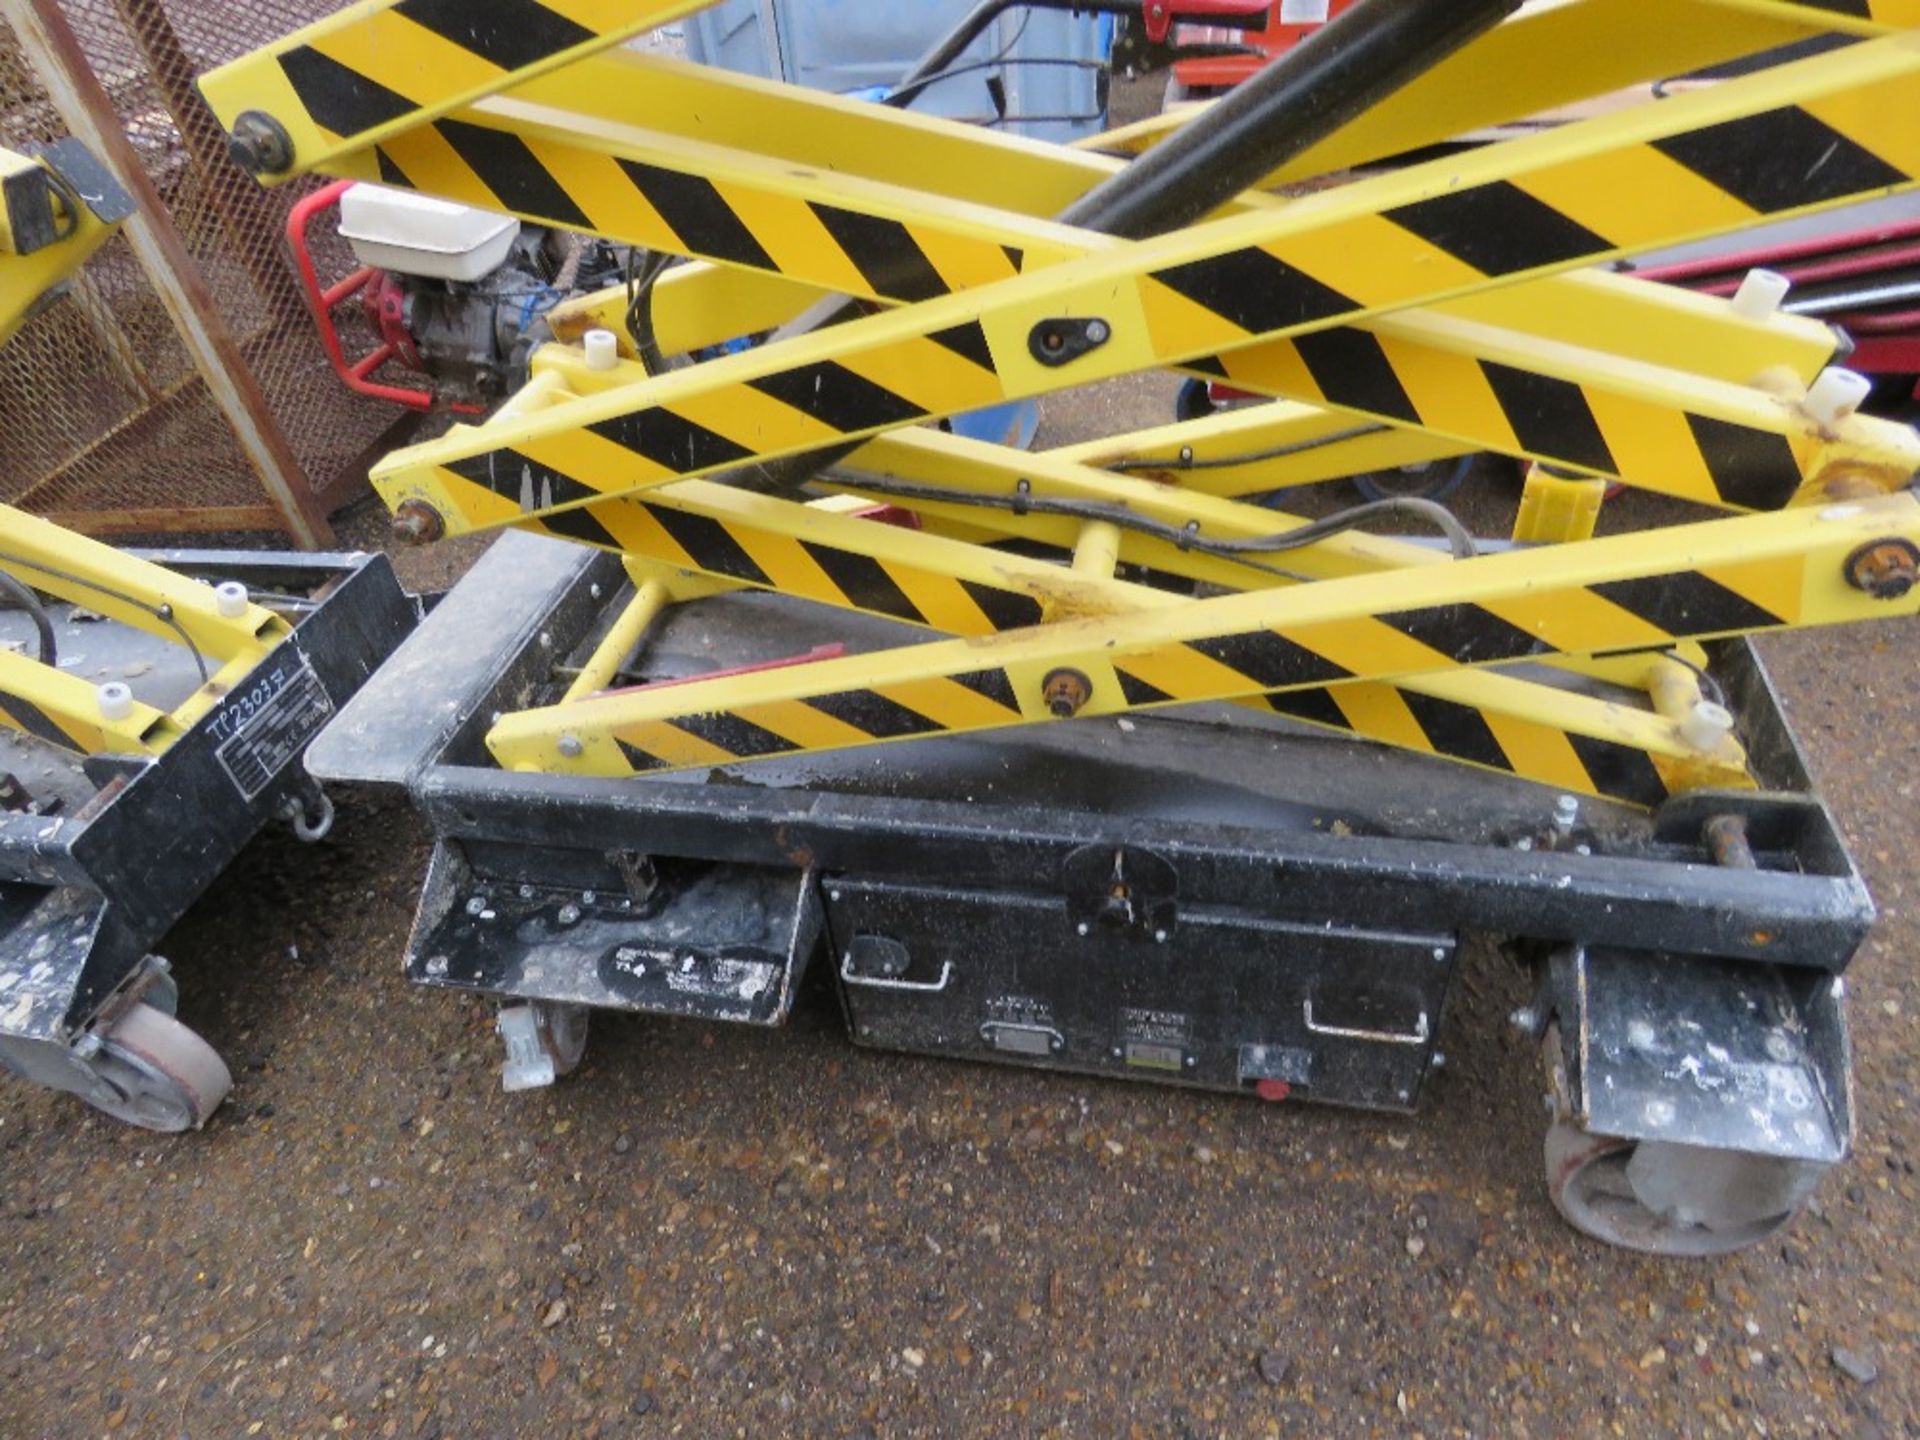 BOSS X3X BATTERY POWERED SCISSOR LIFT UNIT, YEAR 2019. WHEN TESTED PUMP WAS SEEN TO PUMP AND WAS SEE - Image 2 of 7